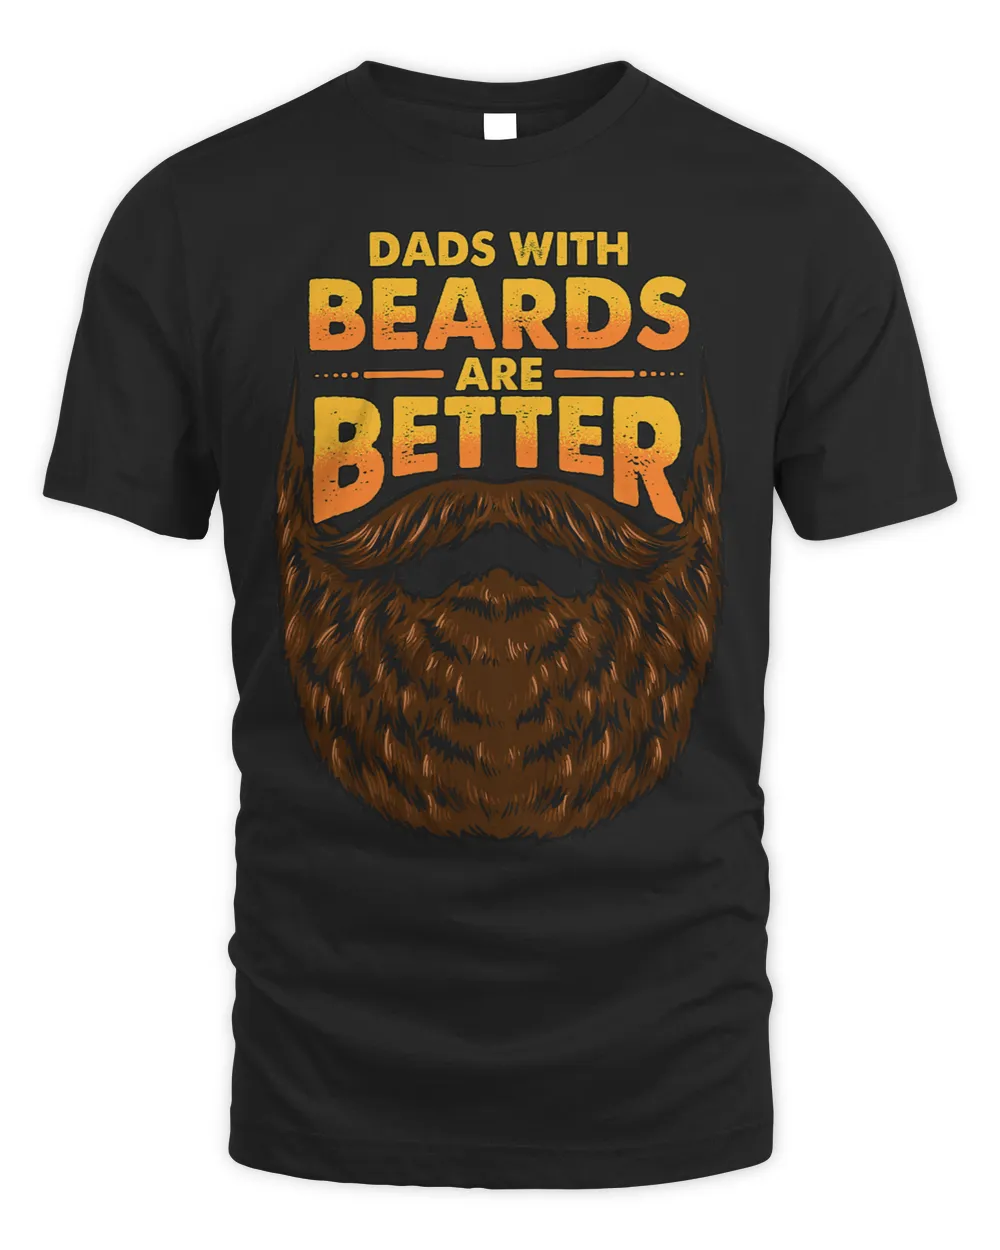 Mens Funny Fathers Day Shirt Dad with Beards Better Plus Size